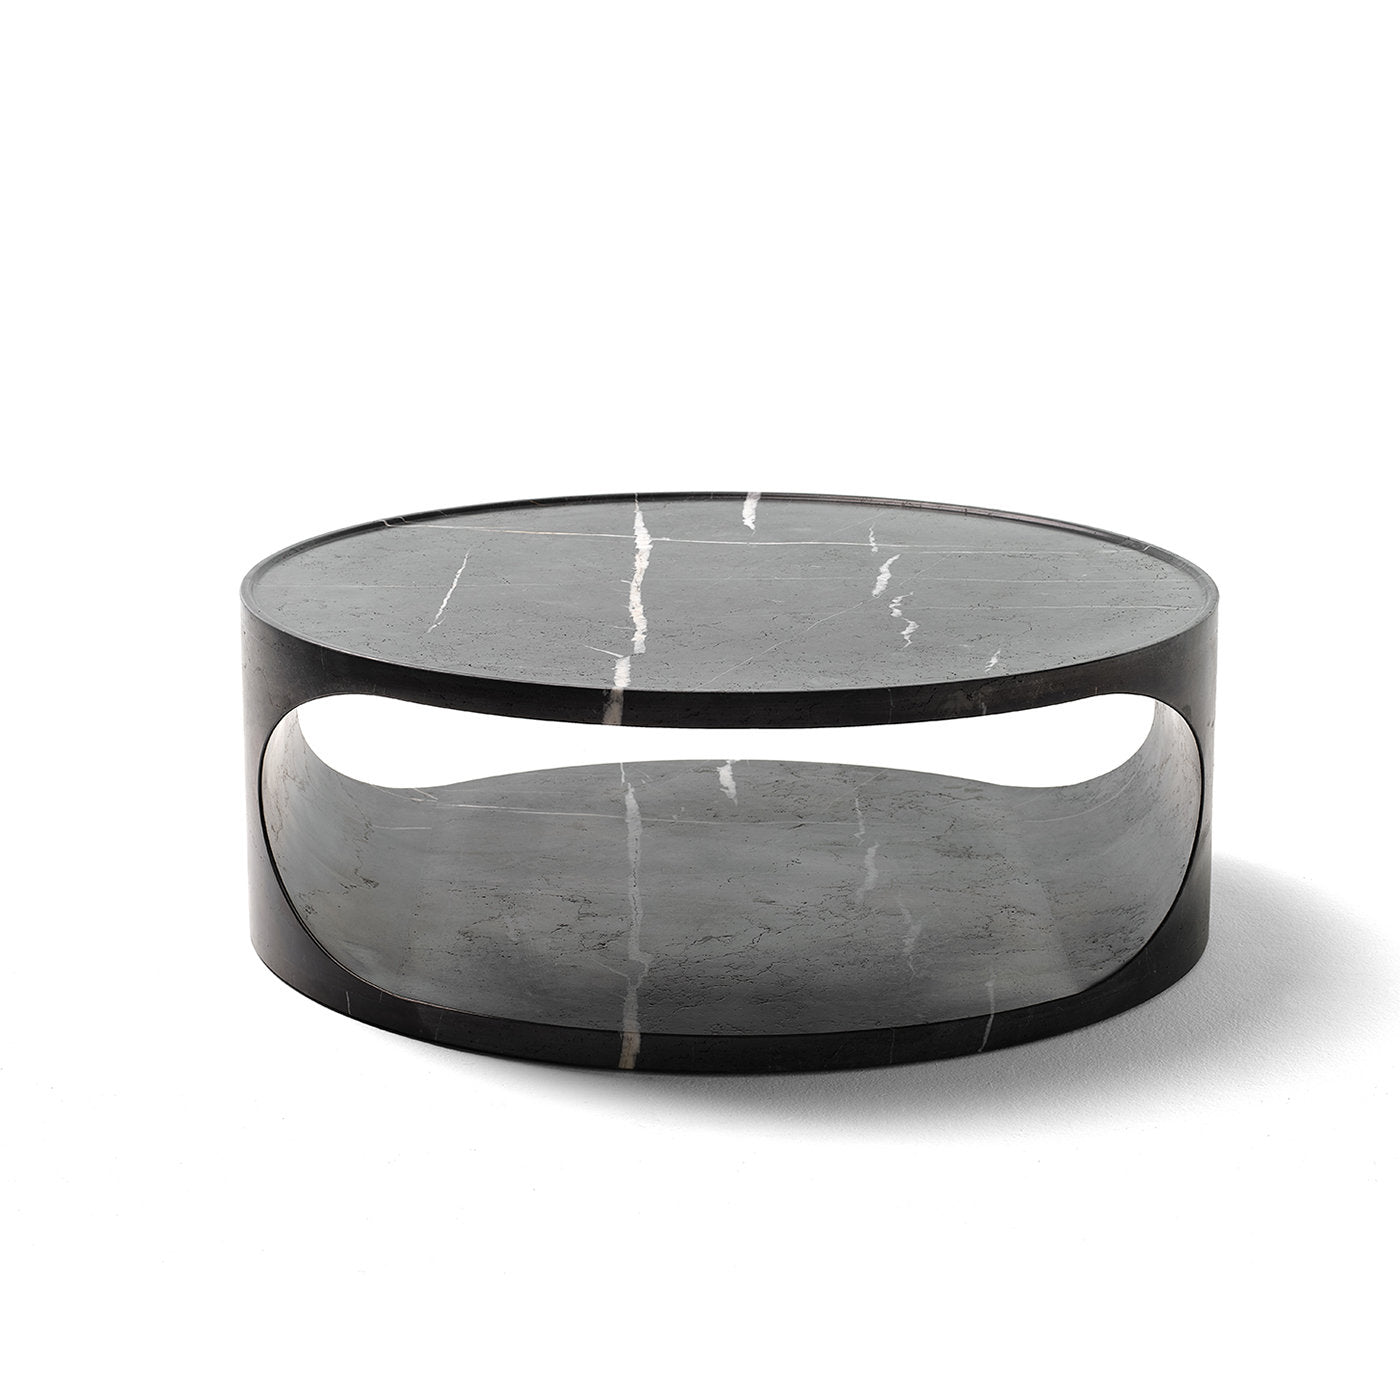 Roll Saint Laurent Marble Coffee Table by Federico Carandini - Alternative view 2